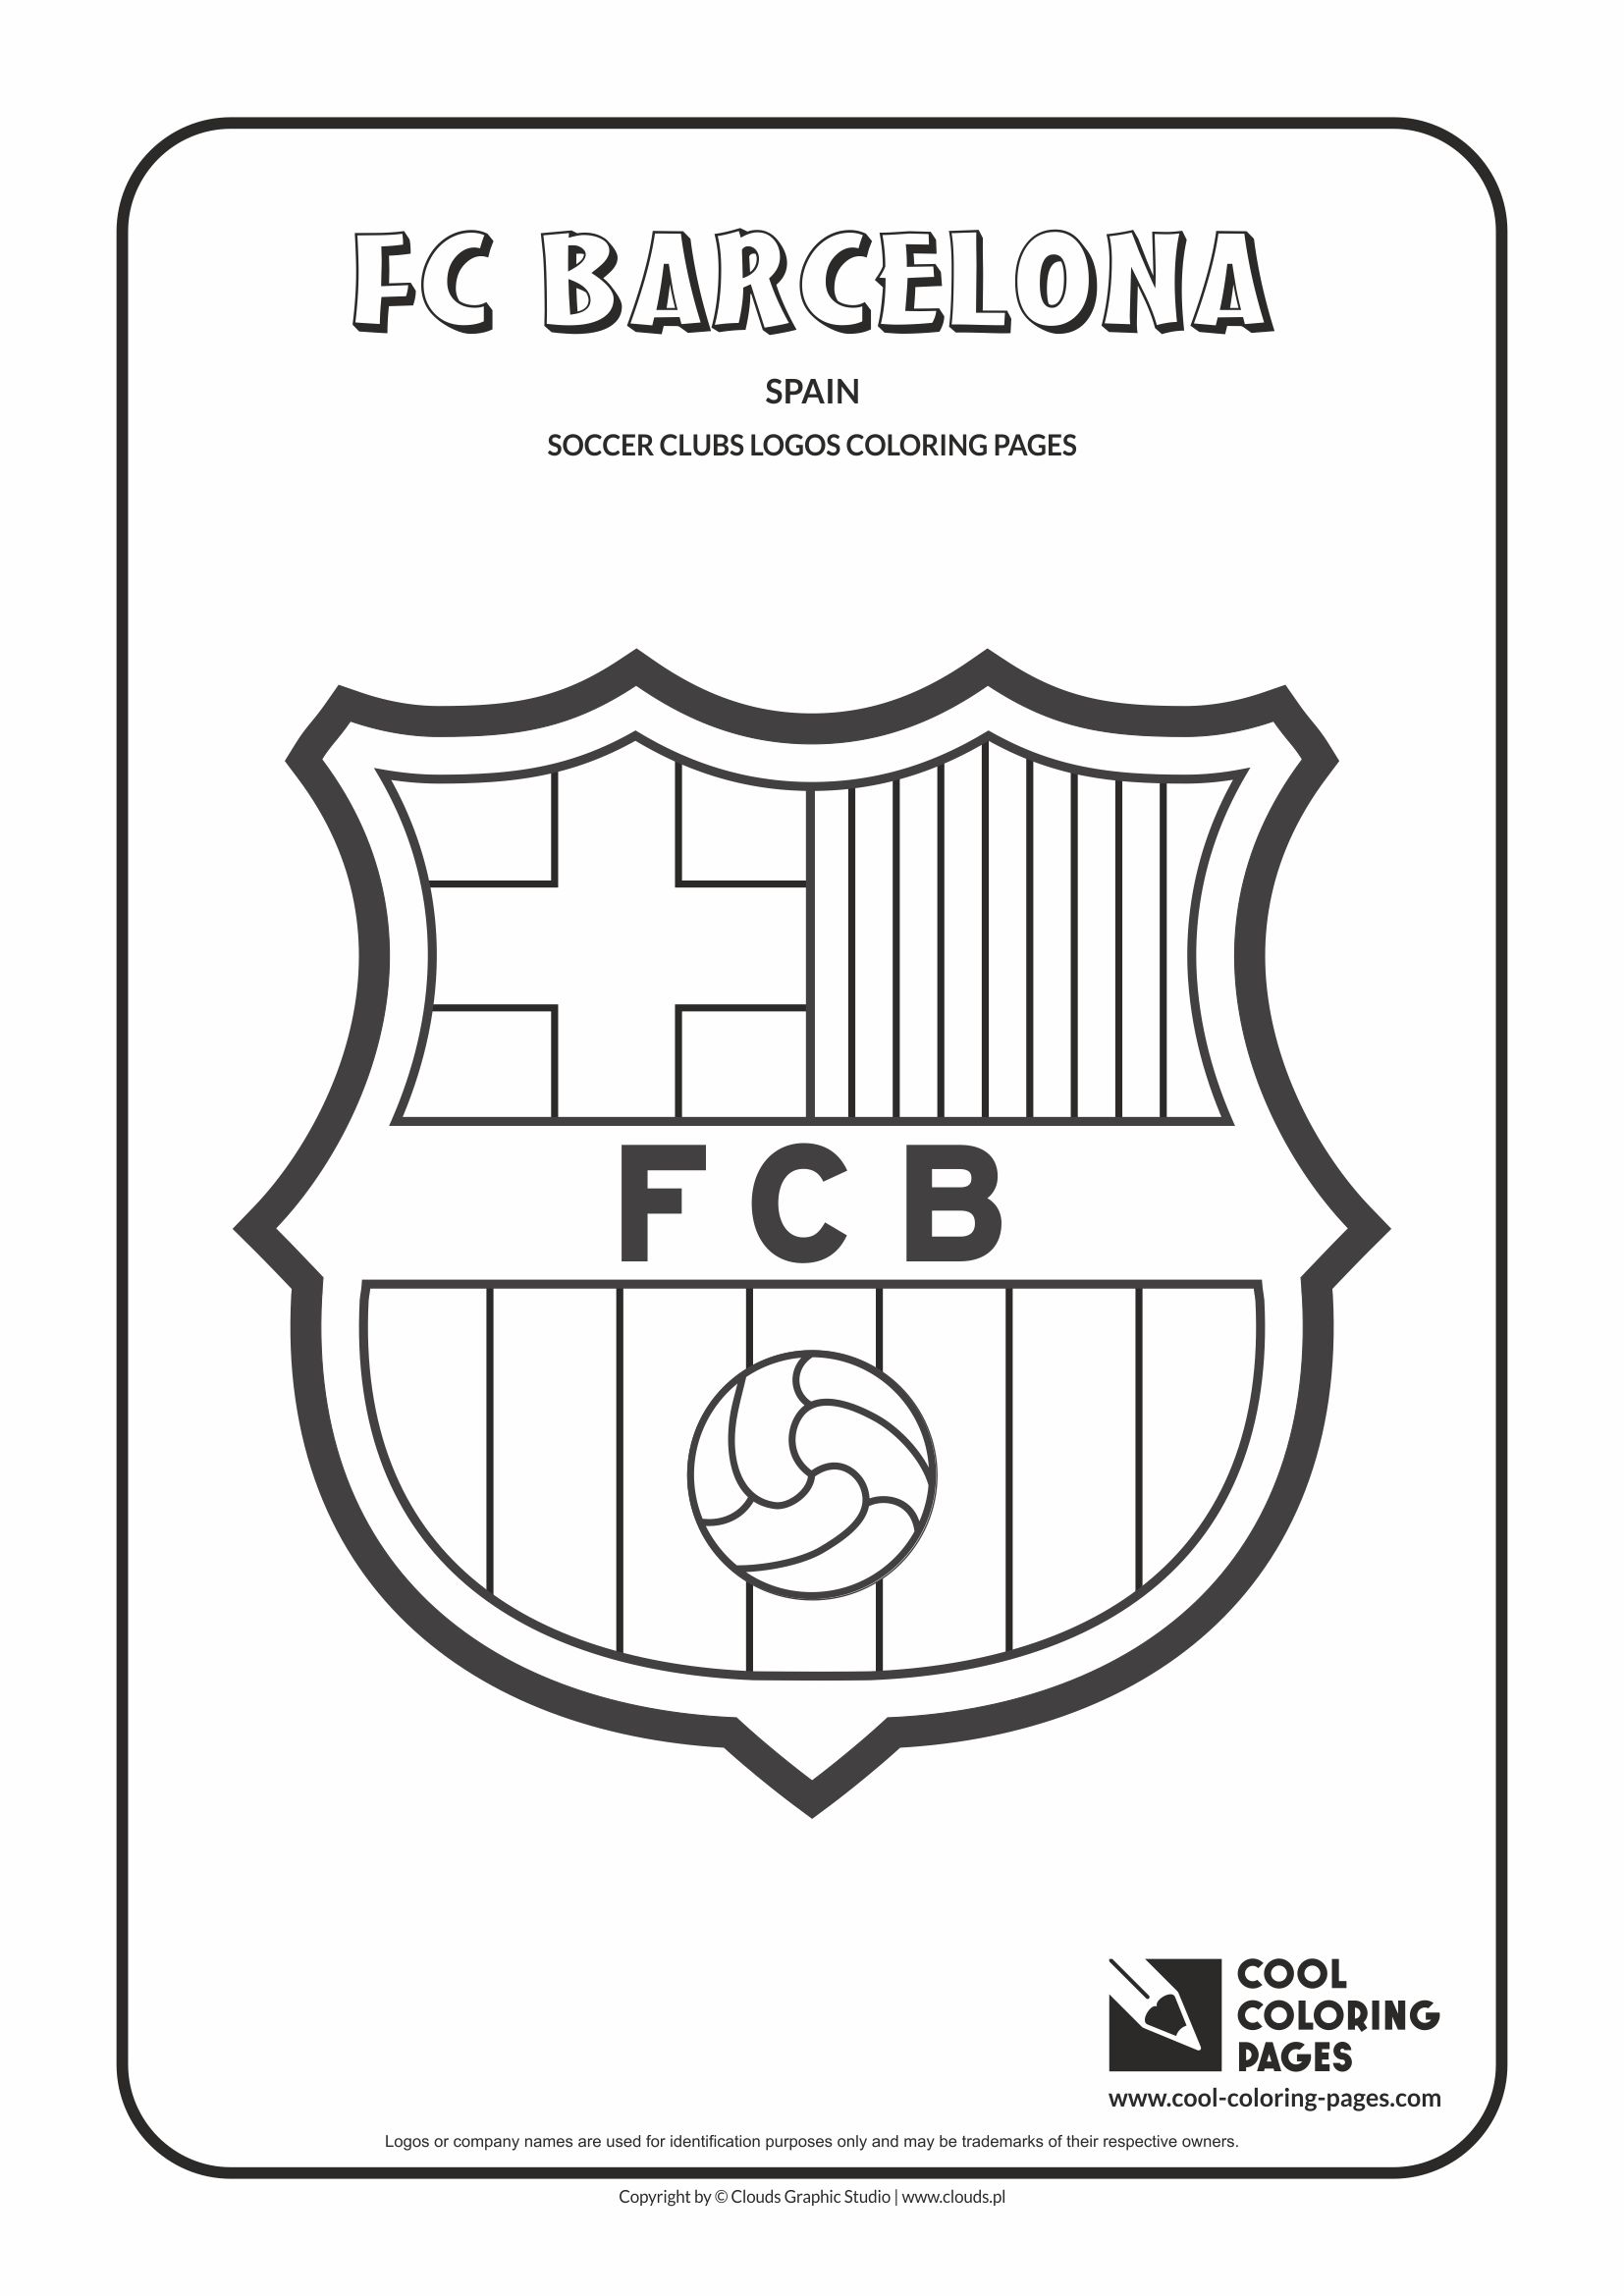 Cool coloring pages fc barcelona logo coloring page